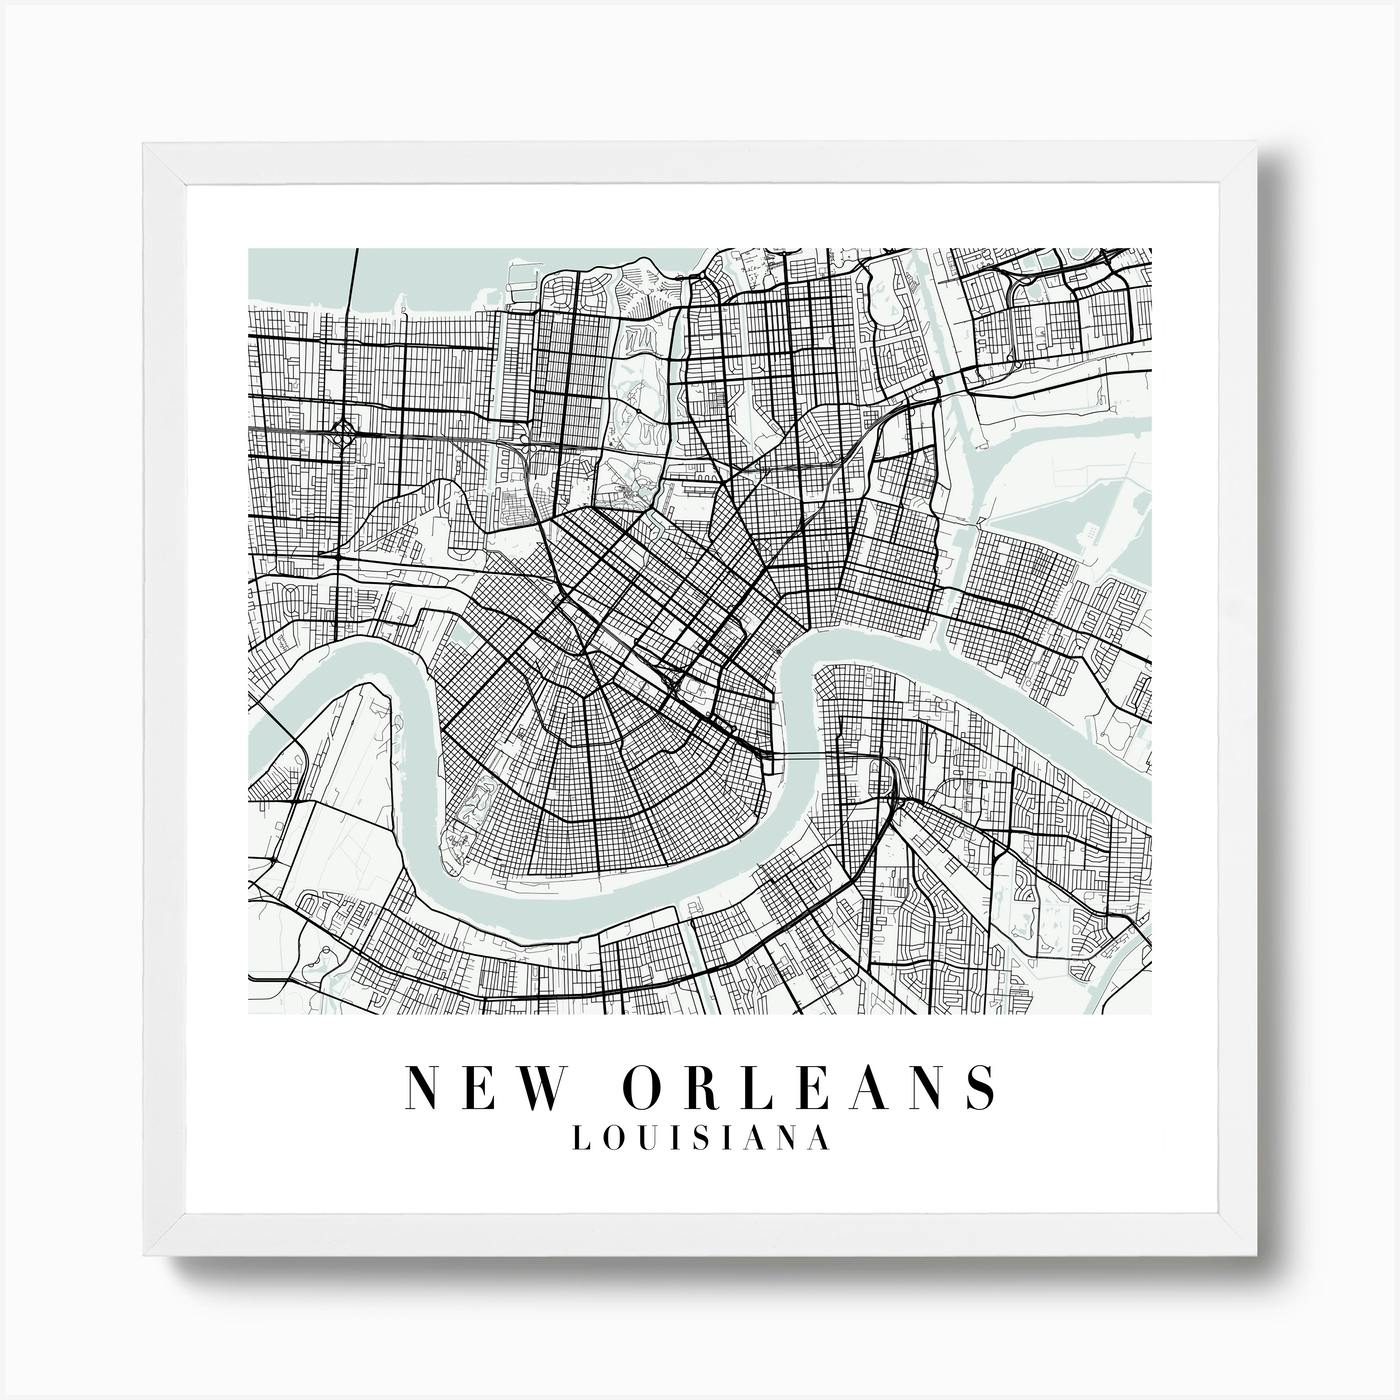 Louisiana New Orleans Unframed Art Print Colorful Street Map Poster